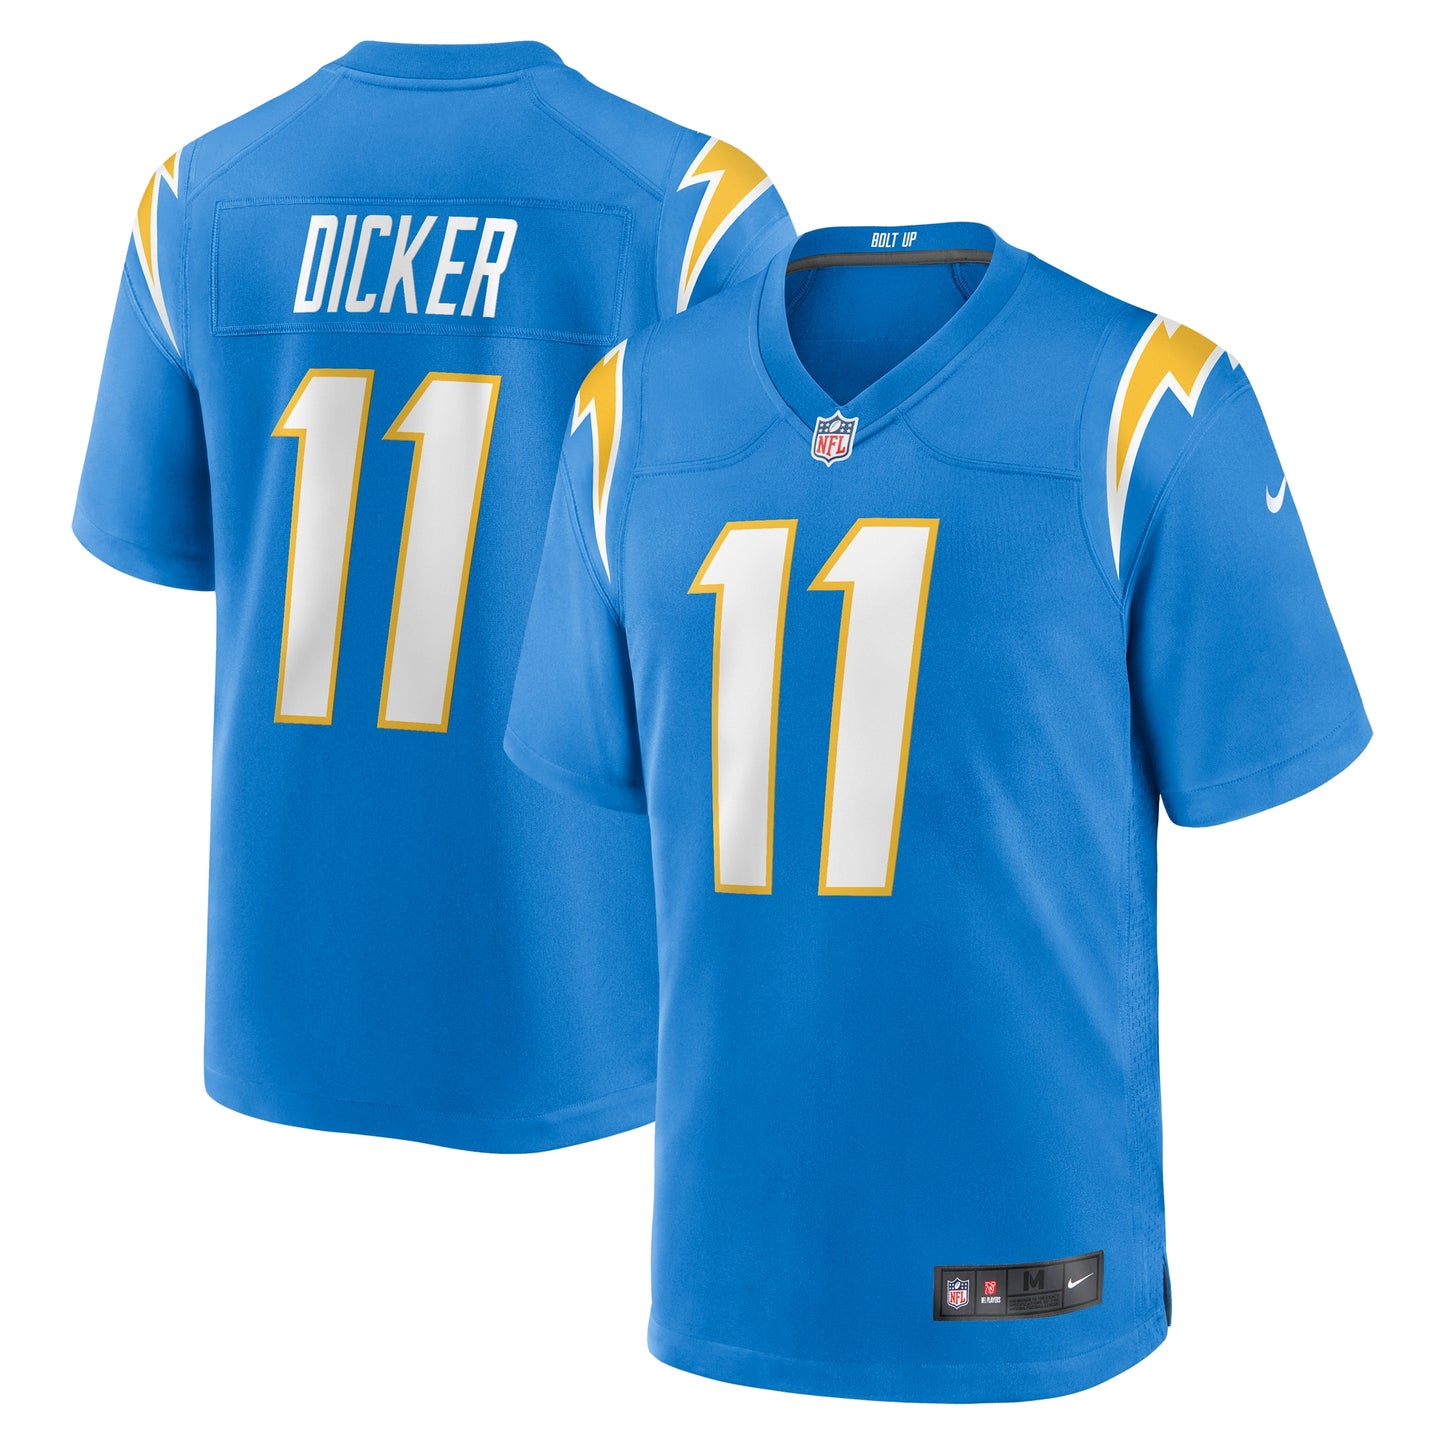 Cameron Dicker Los Angeles Chargers Nike Game Jersey - Powder Blue